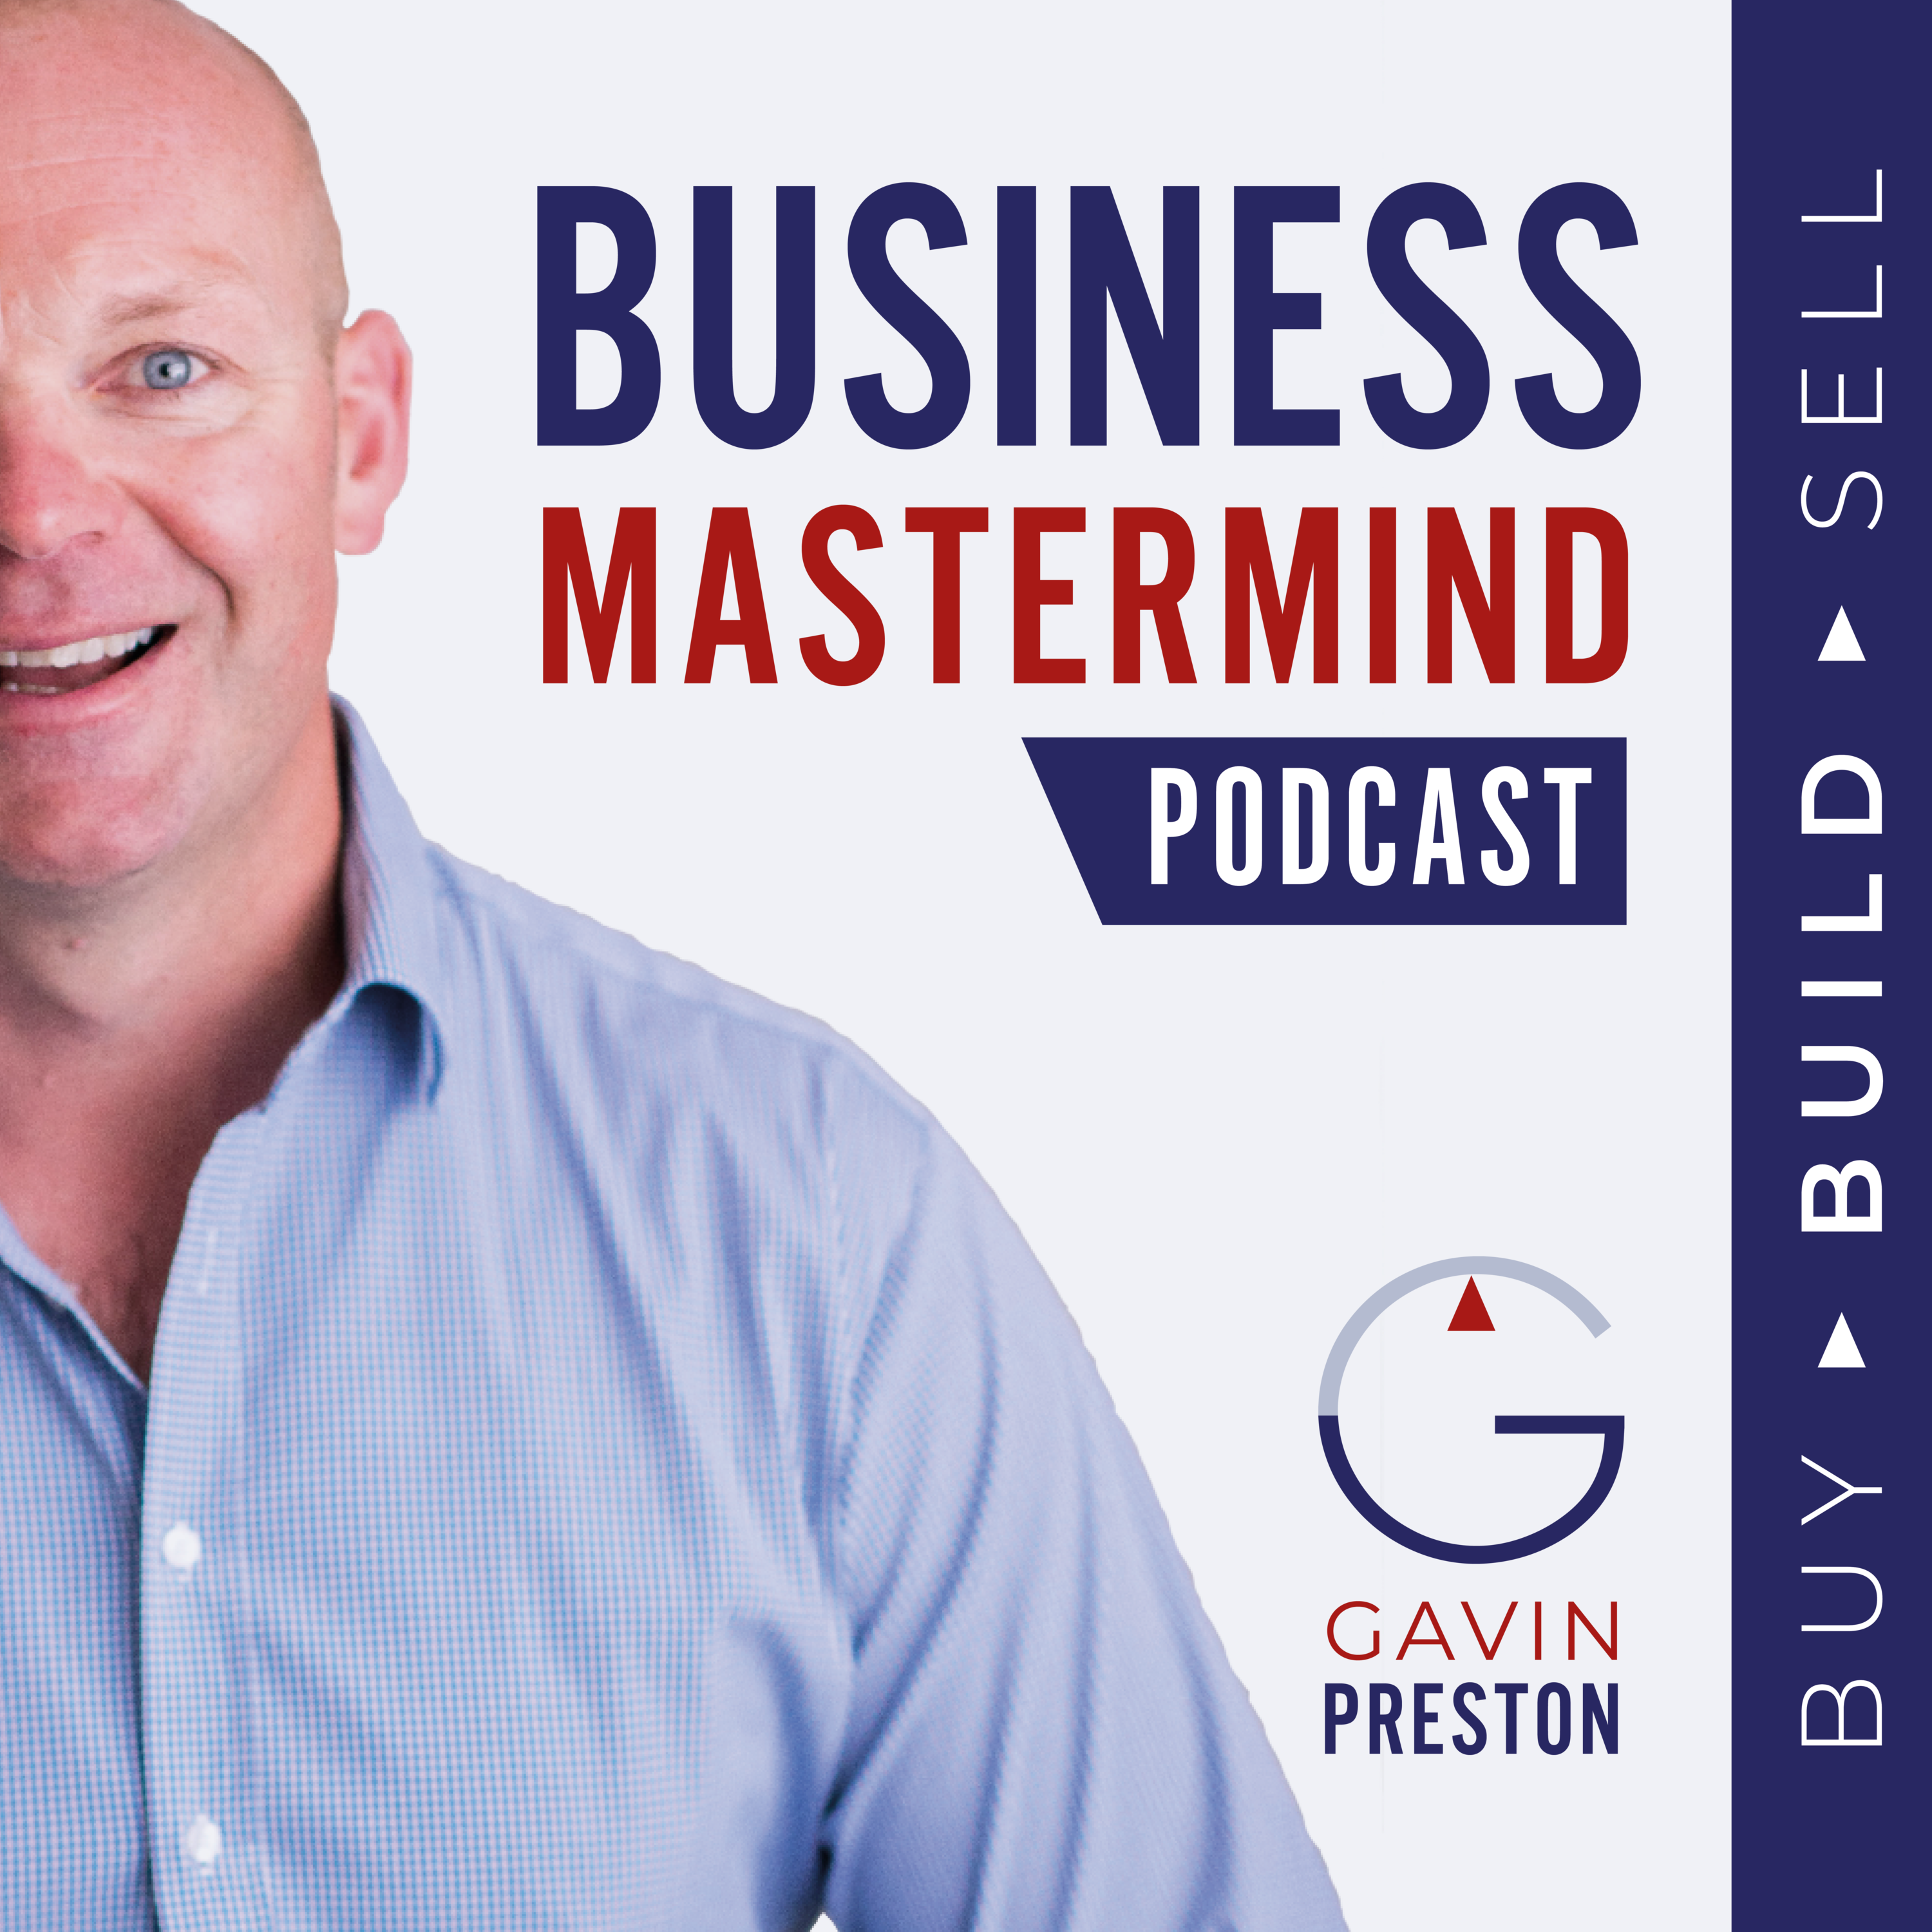 Keep Your Boat Afloat During COVID 19 Times: Collabcast with Nick Bradley re Business Planning during COVID 19 Times